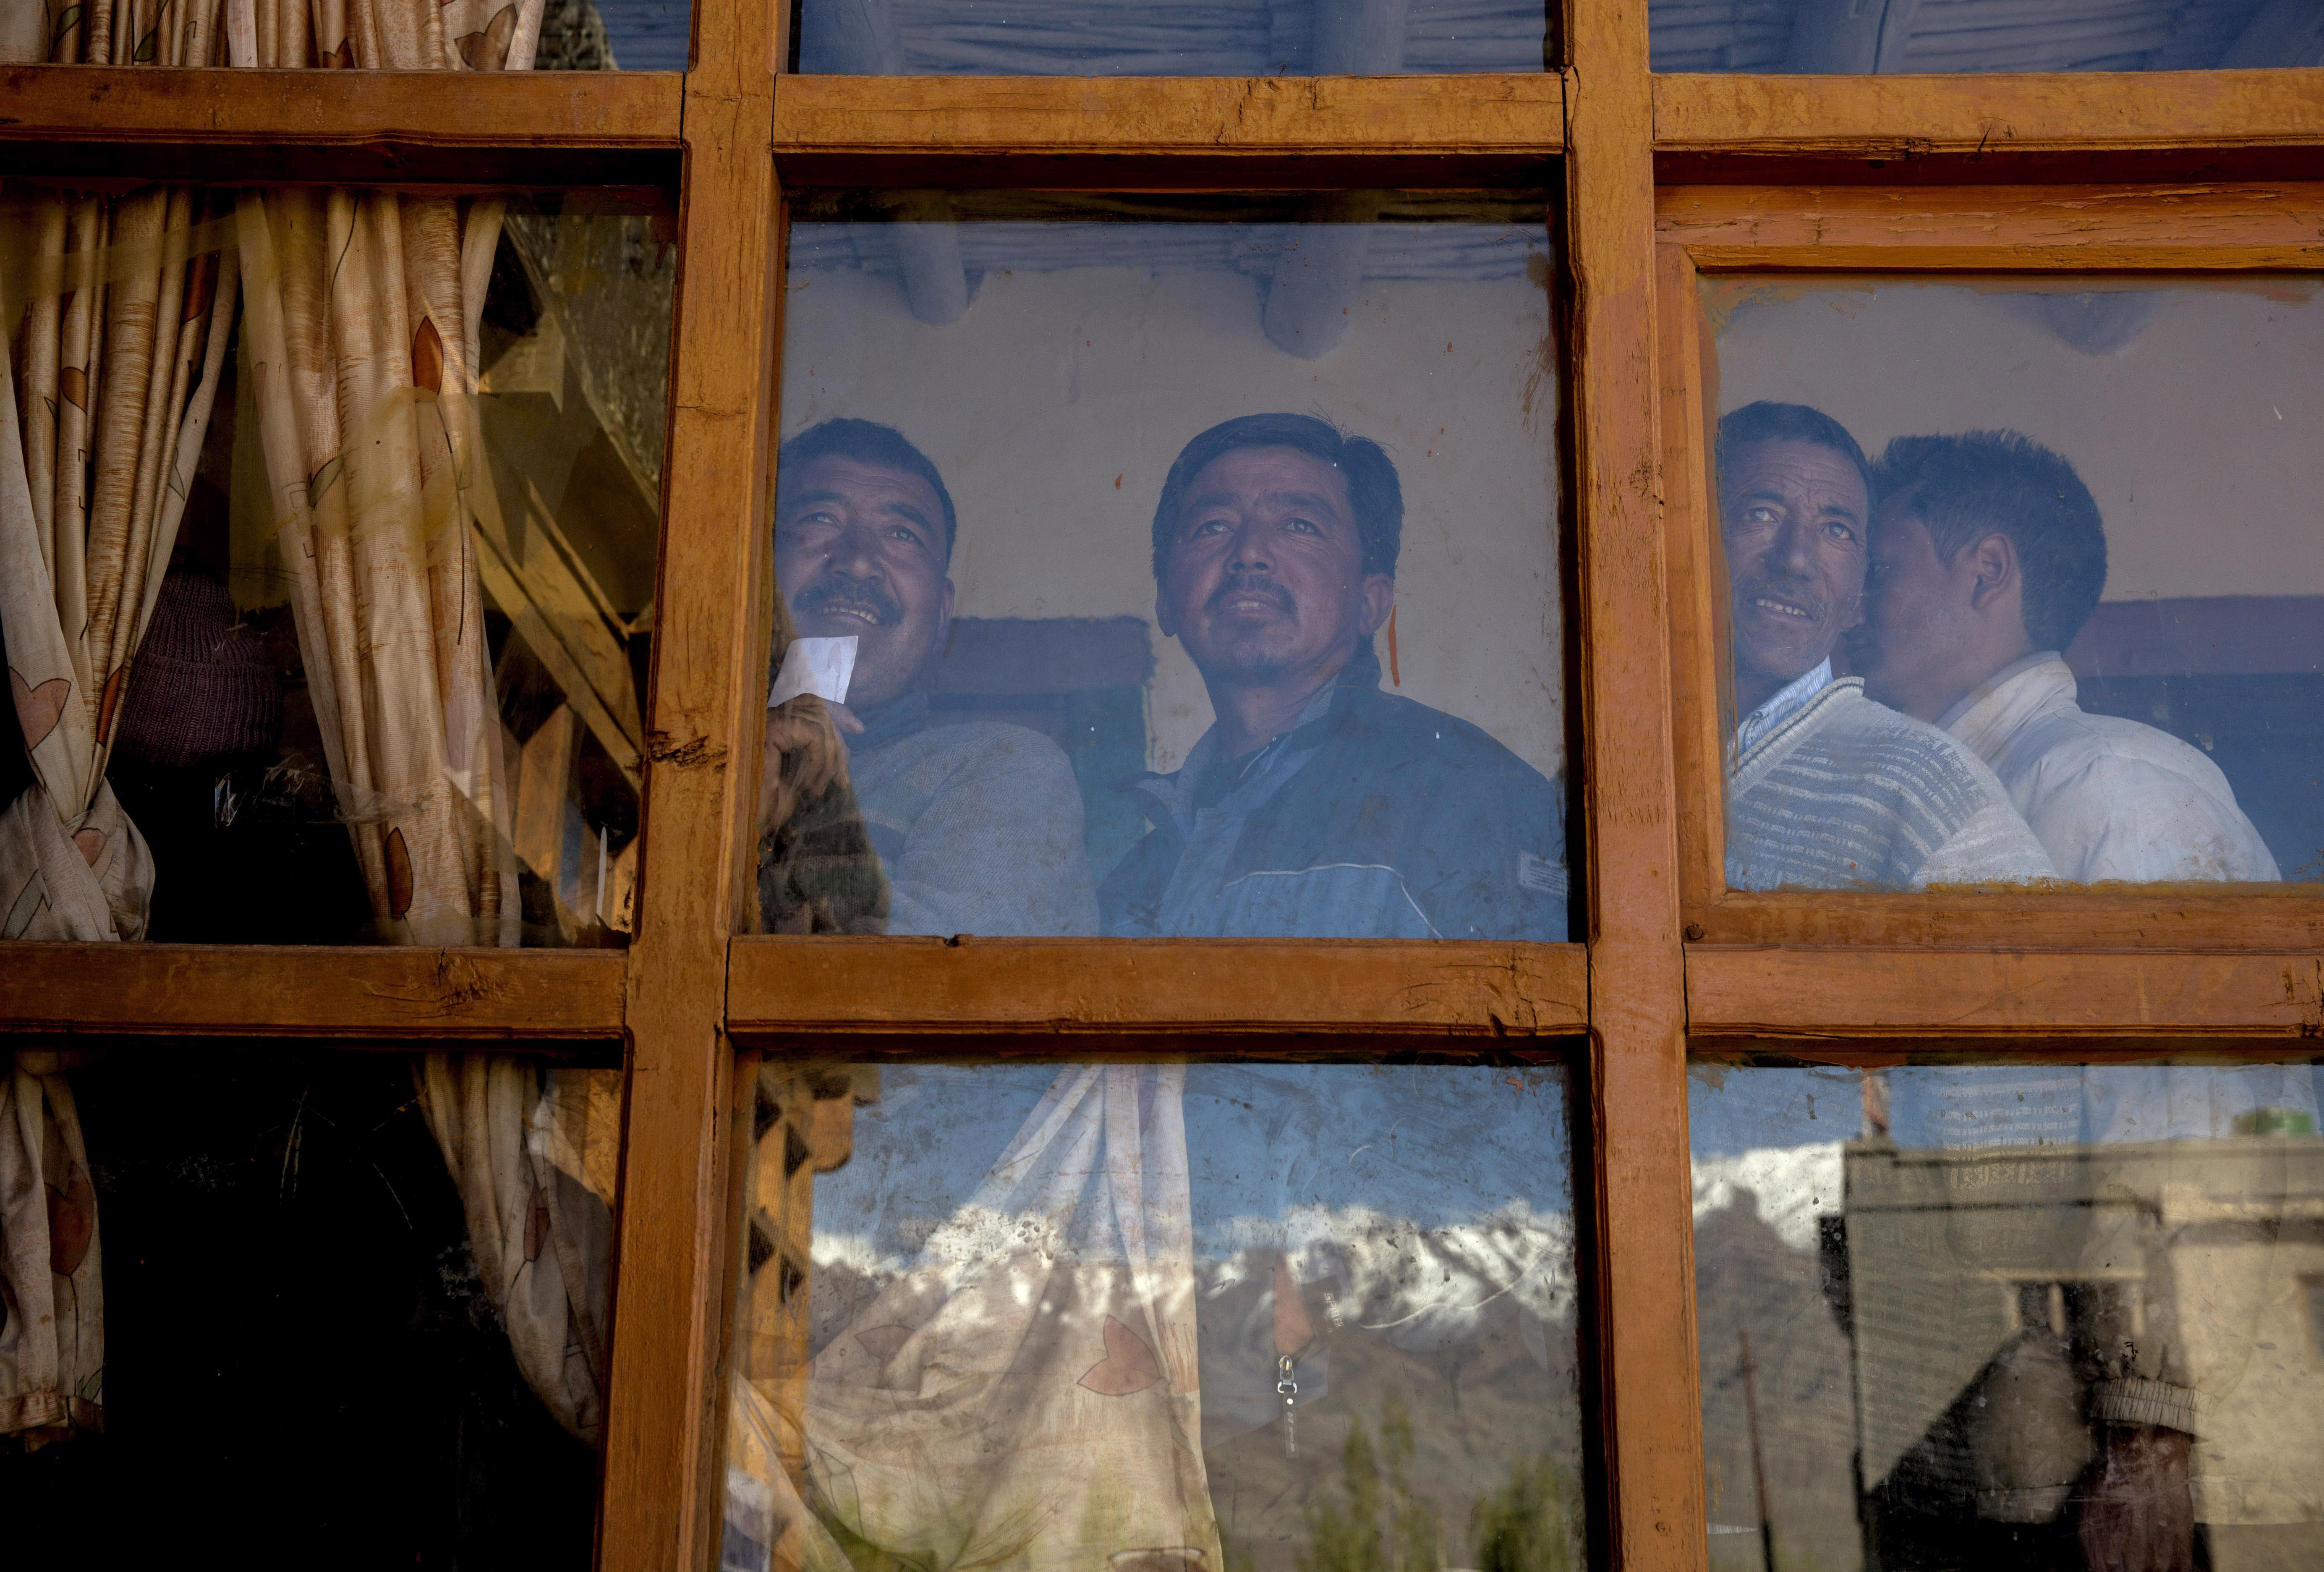 Ladkahis wait inside a polling station to vote near the Thiksey  Monastery on May 7, 2014 in Thiksey, Ladakh.